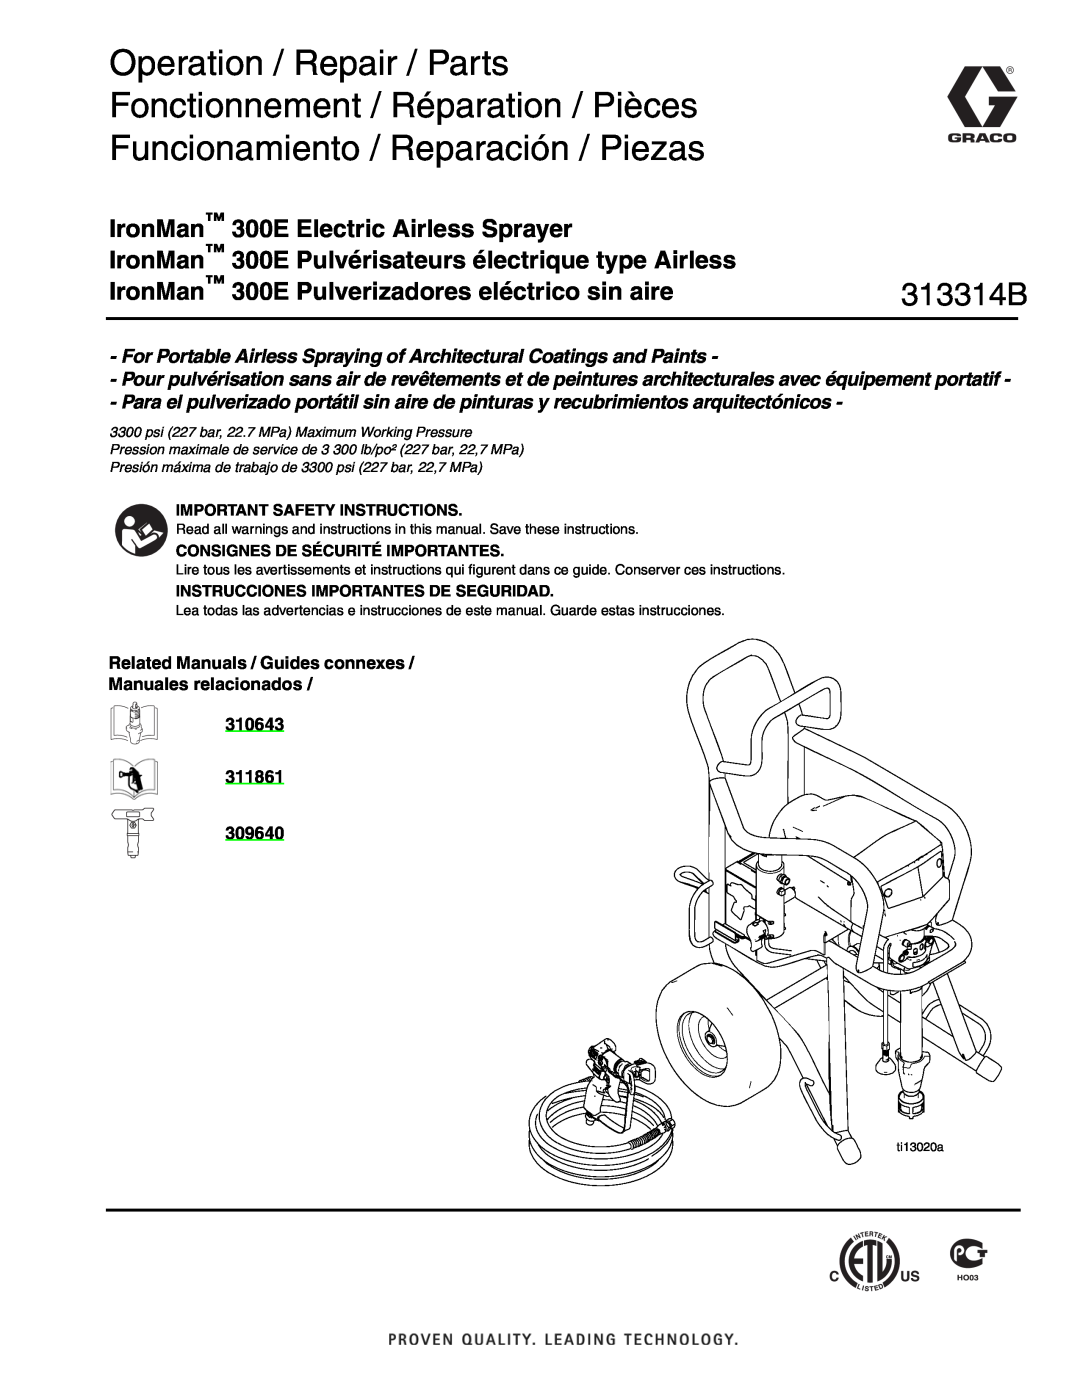 Graco Inc 300E important safety instructions 313314B, Related Manuals / Guides connexes Manuales relacionados 310643 